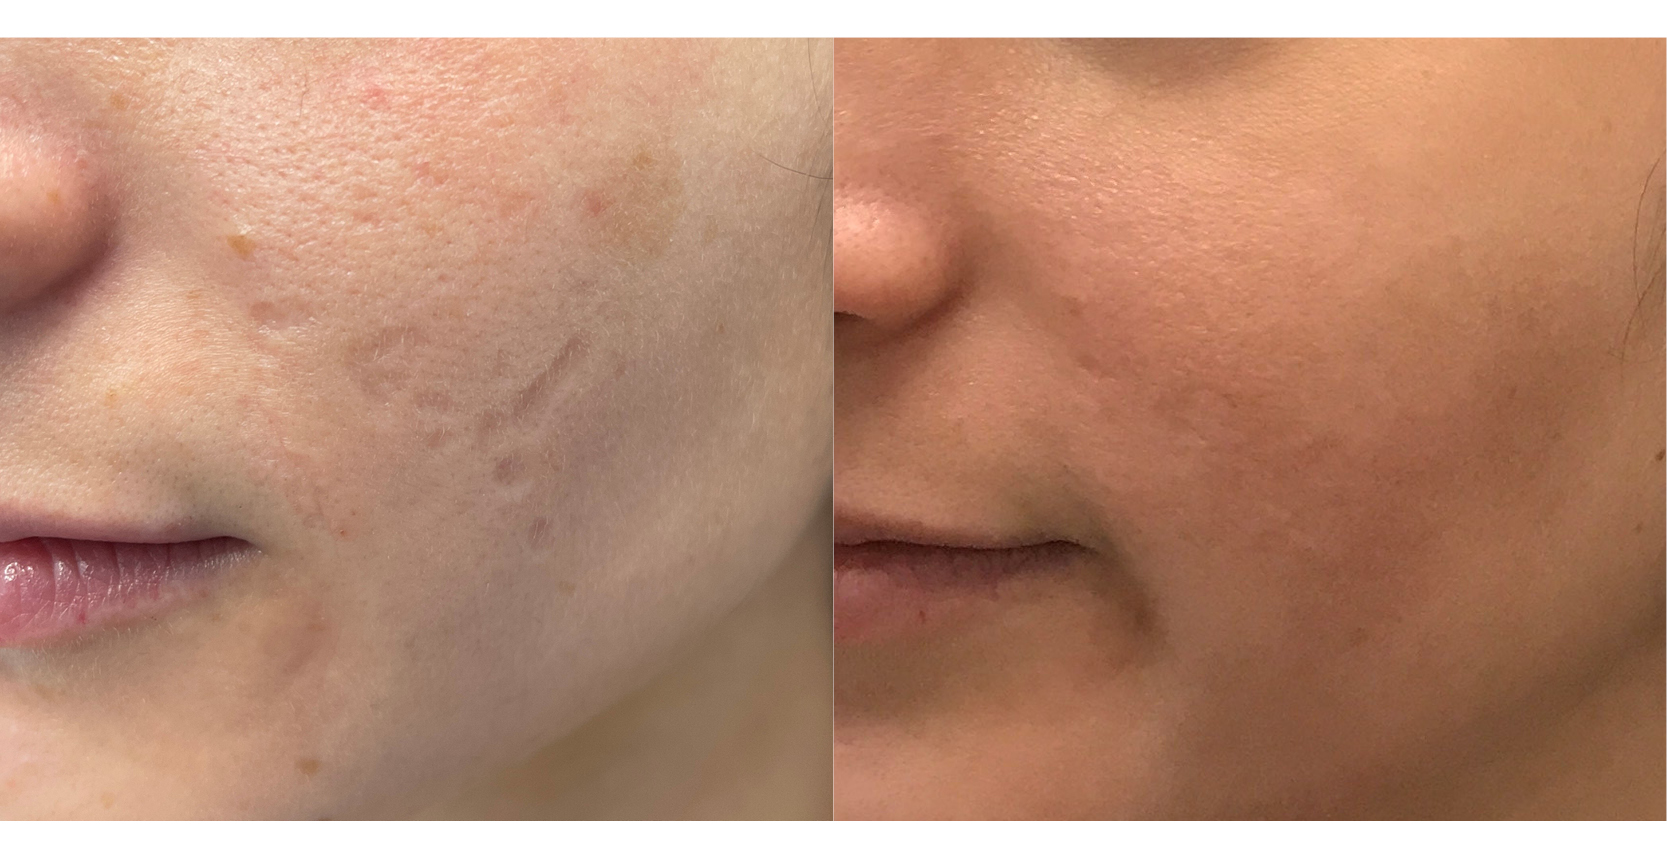 Before and After Fraxel and chem peels for acne scarring